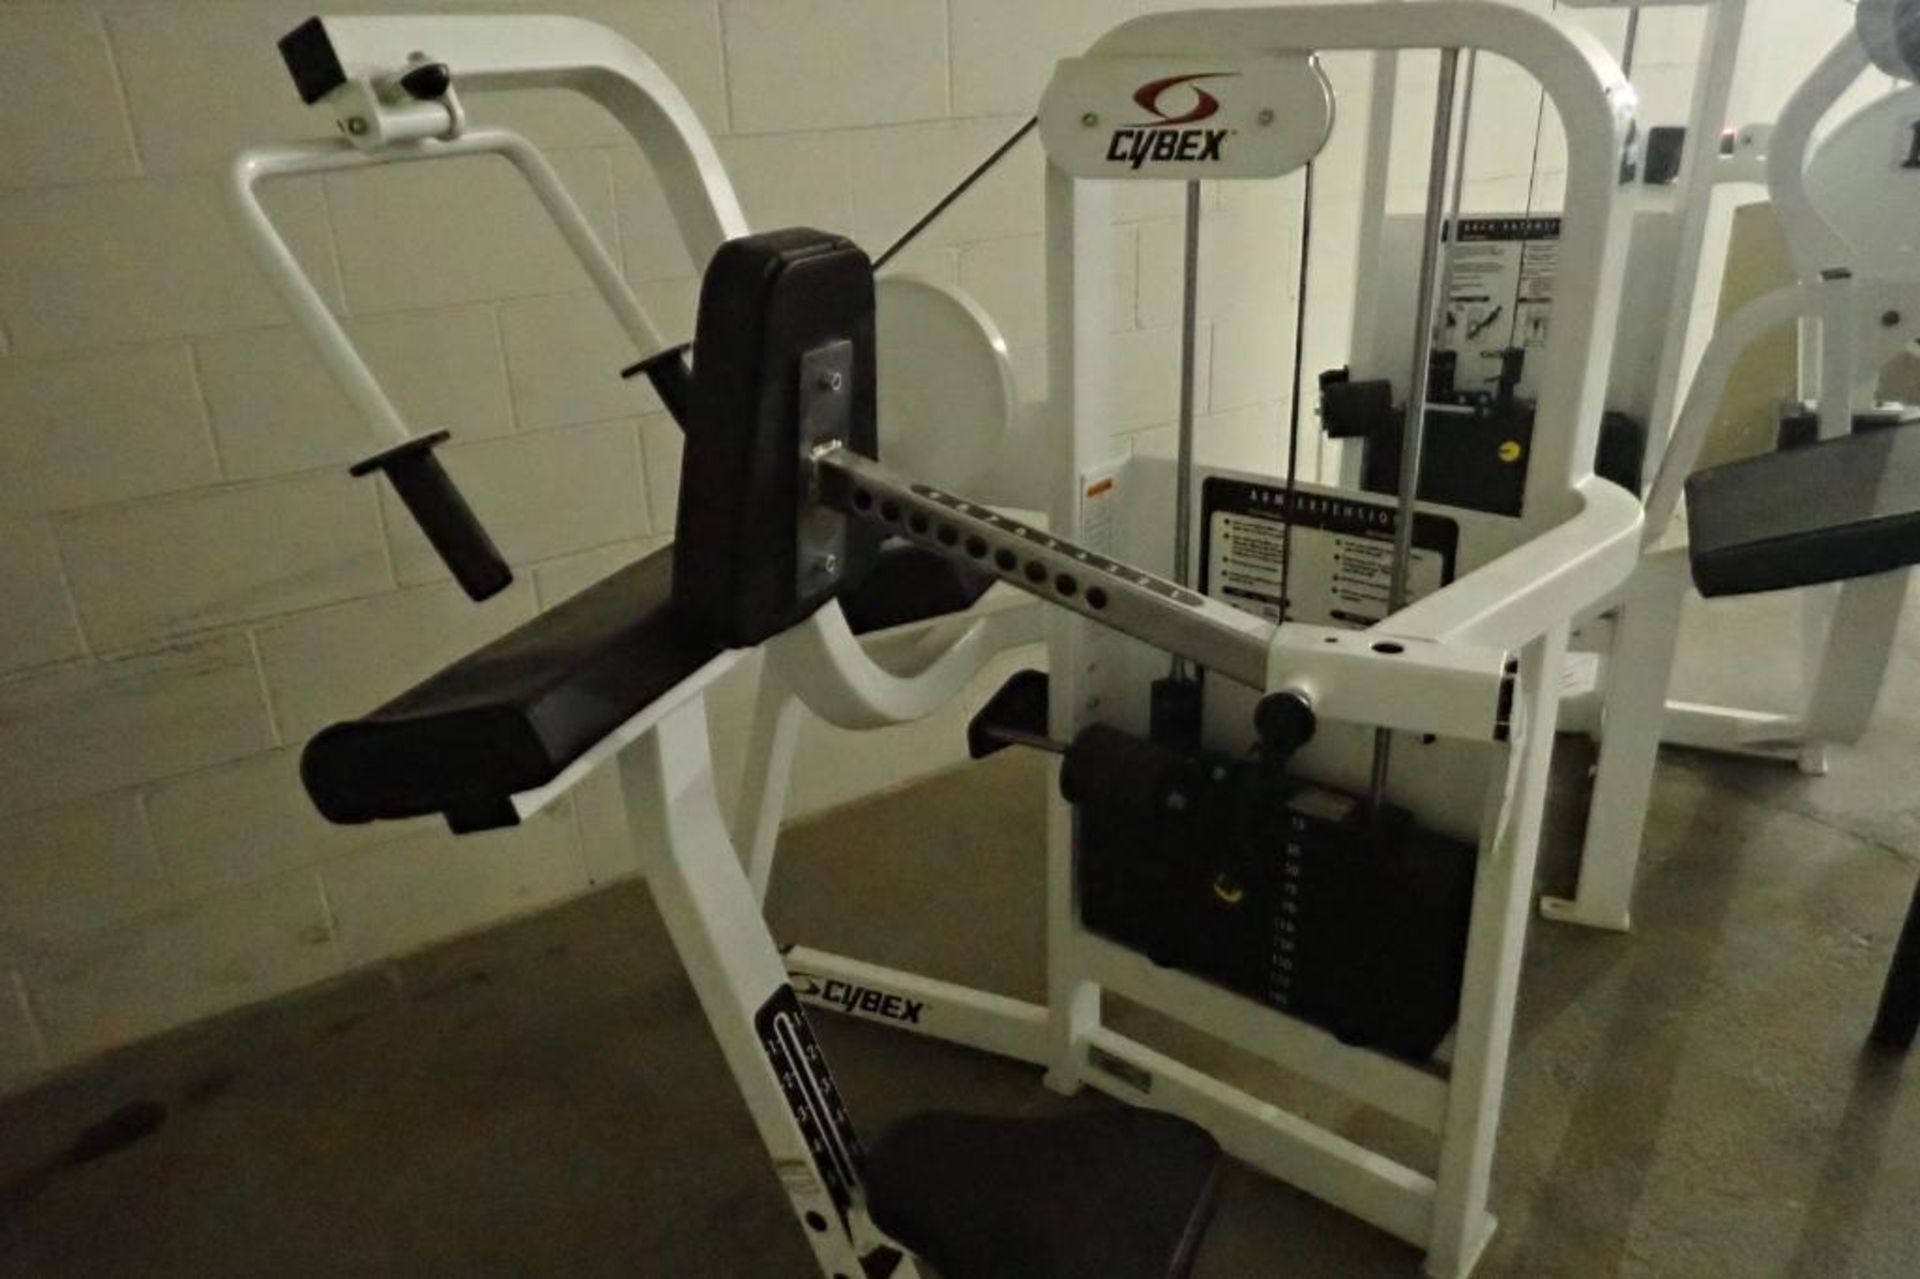 Manufacturer: Cybex - Arm Extension Machine - Model Number: - Image 2 of 5